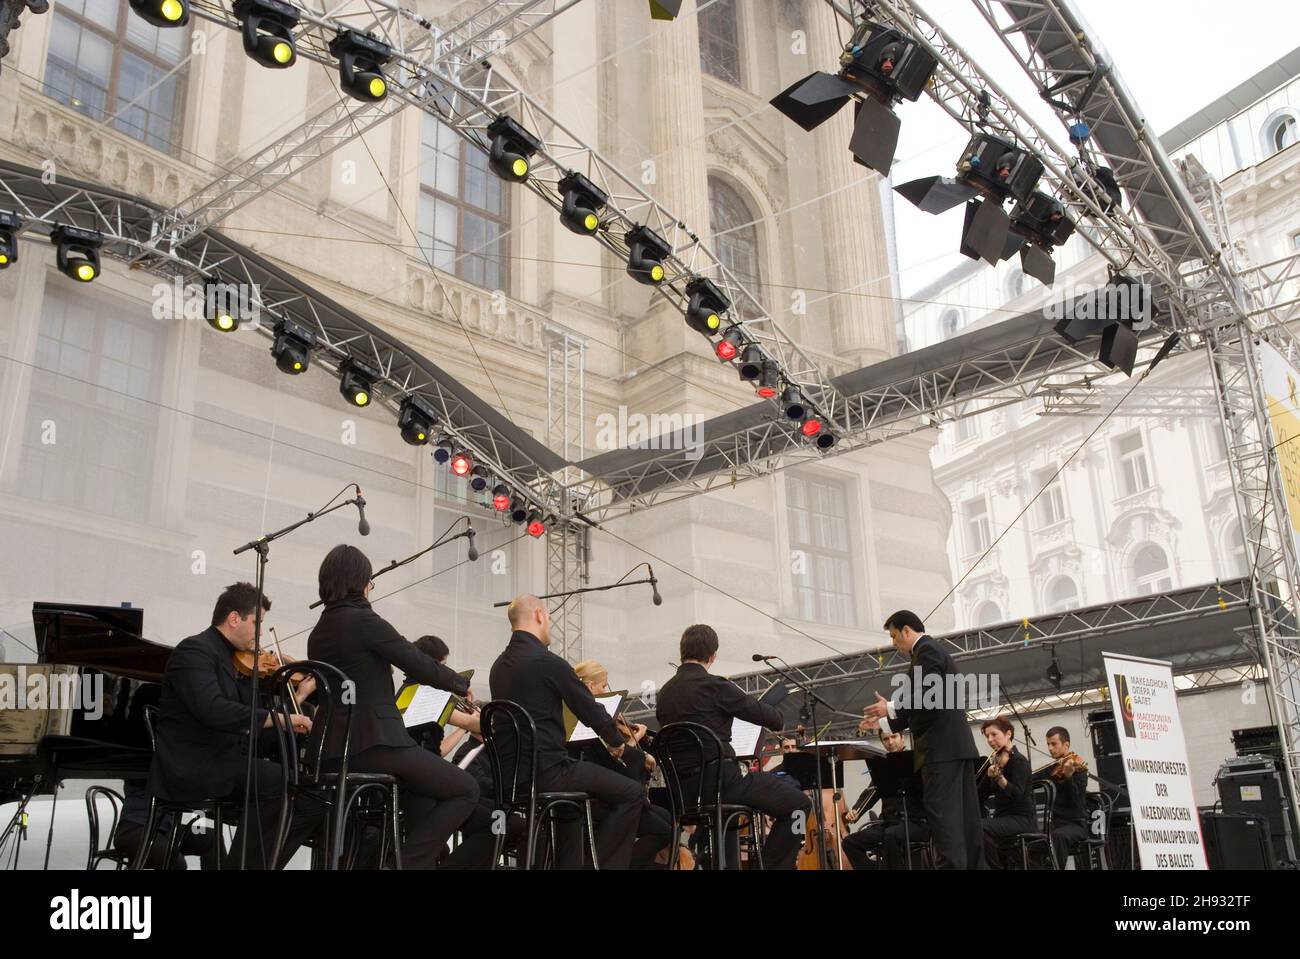 Vienna, Austria. May 29, 2010. Chamber Orchestra of the Macedonian National Opera at the City Festival in Vienna Stock Photo